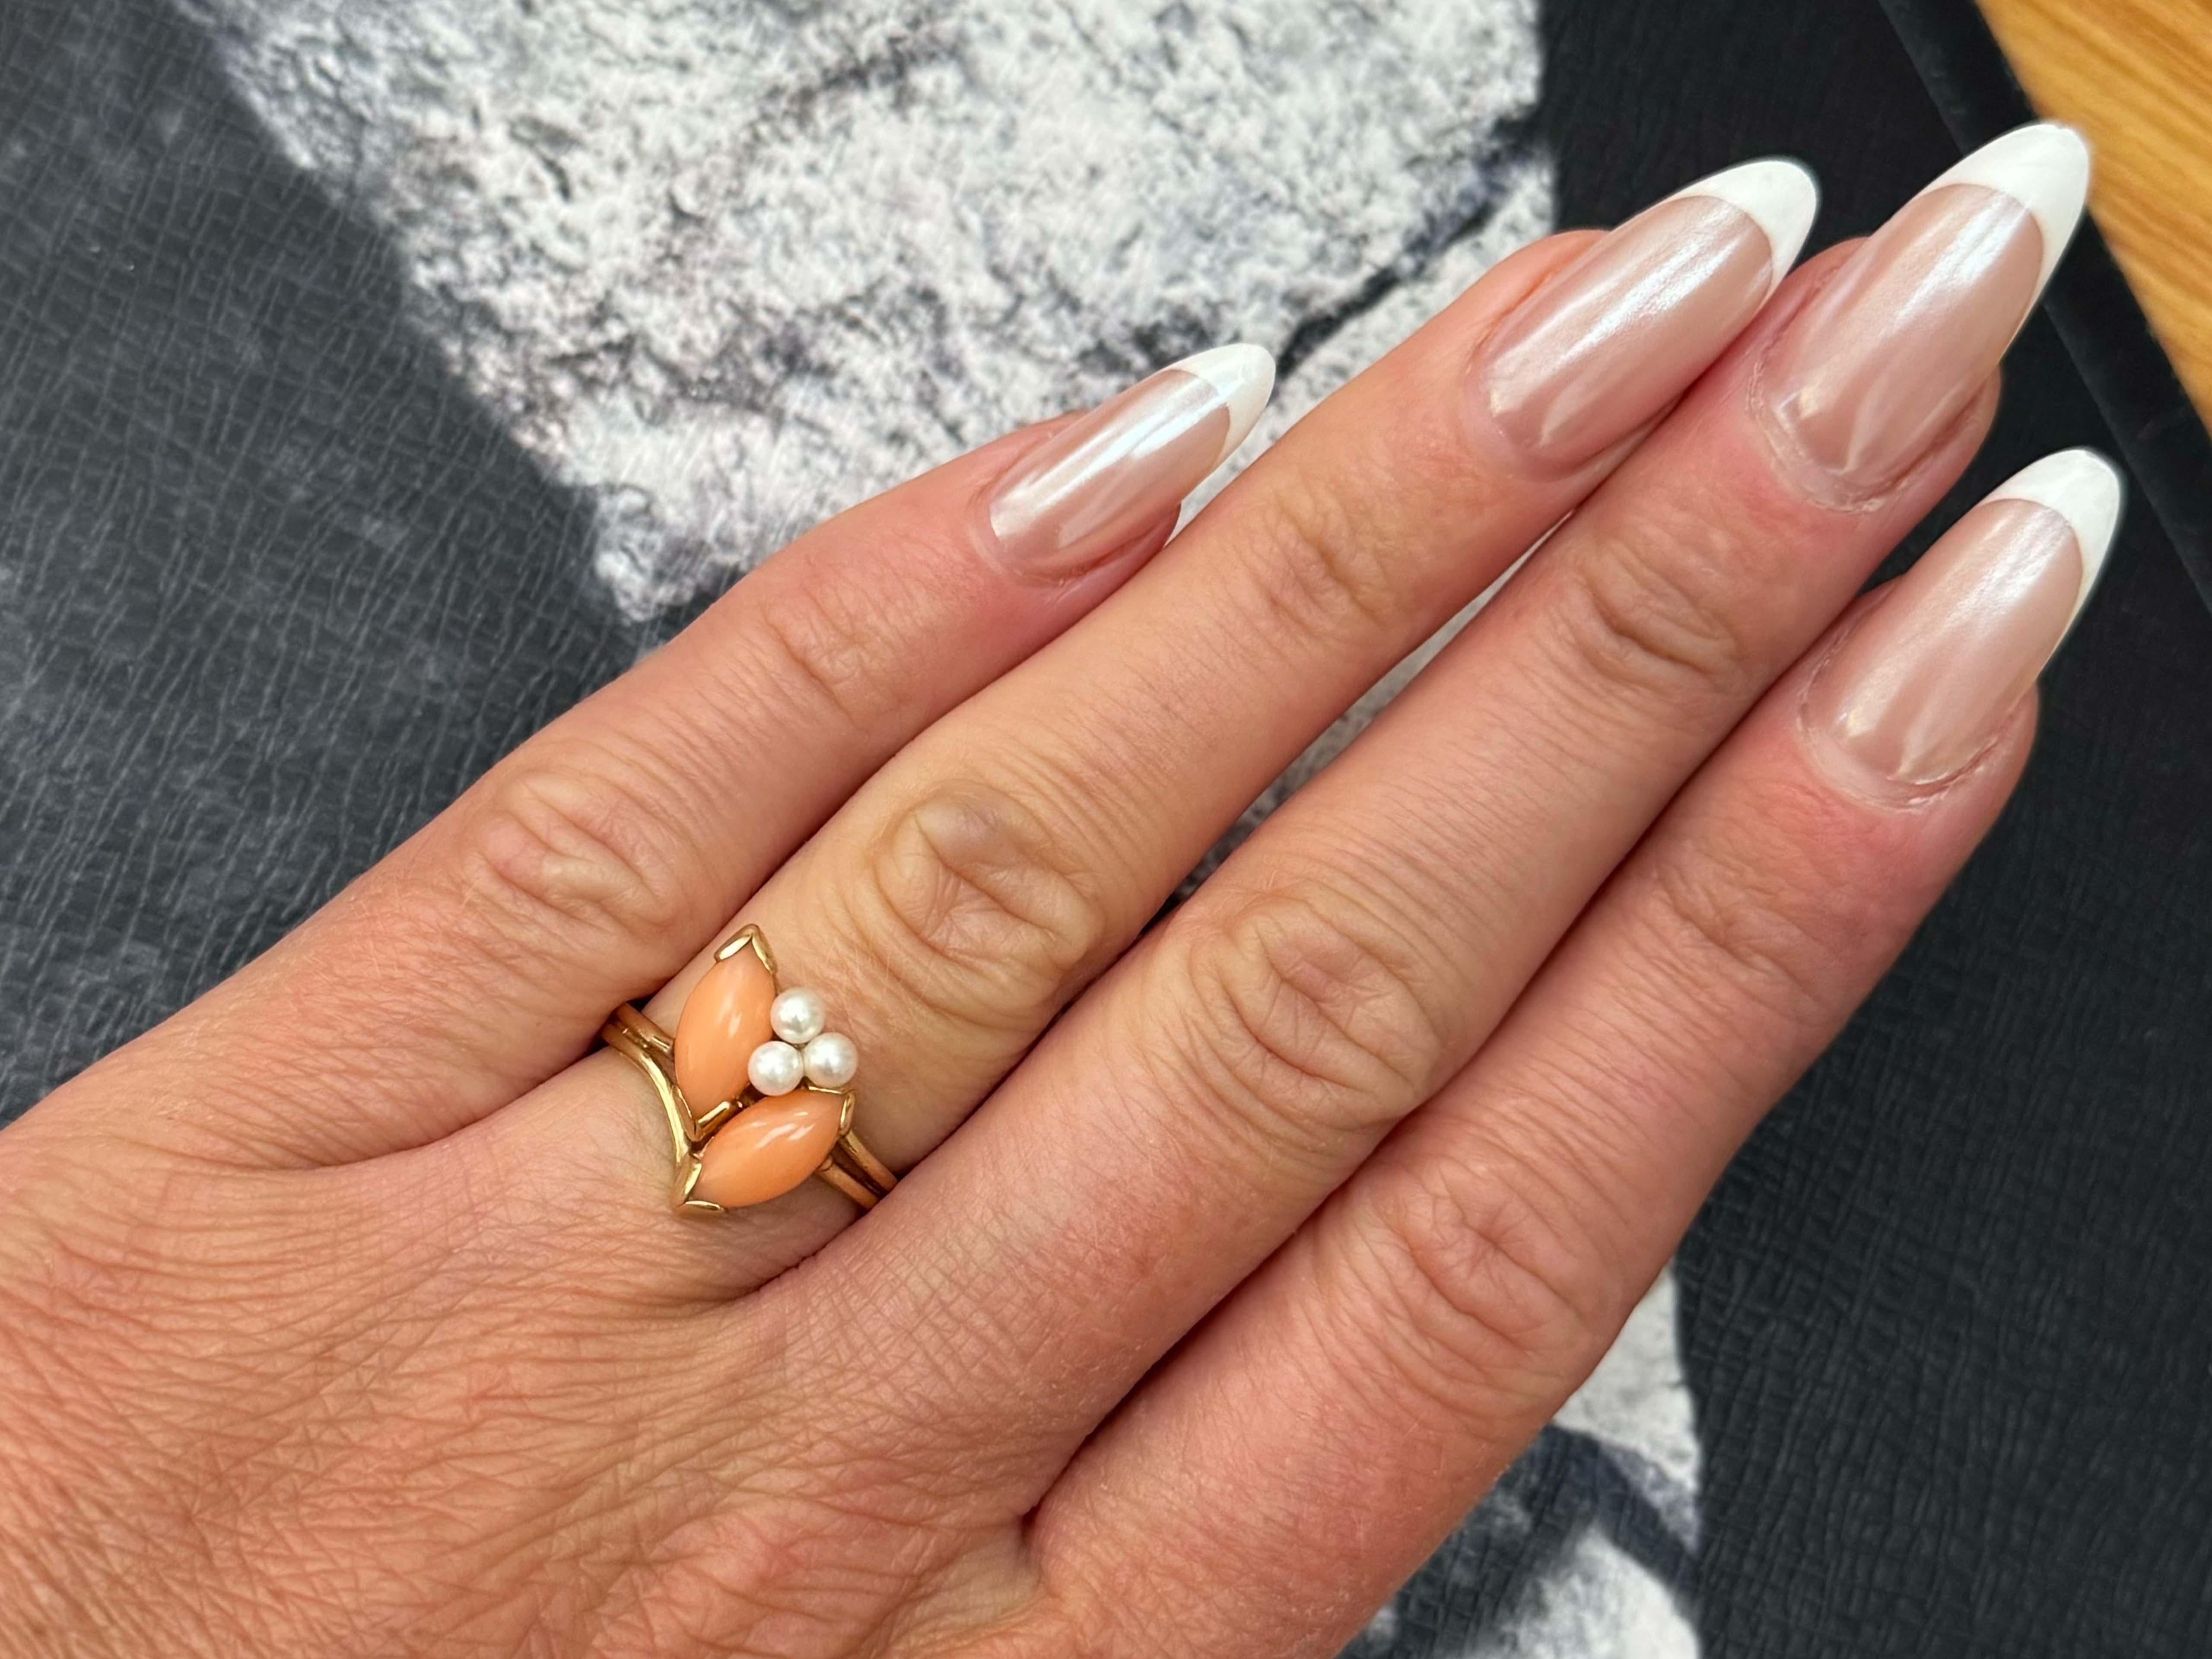 Item Specifications:

Metal: 14K Yellow Gold

Style: Statement Ring

Ring Size: 6.25 (resizing available for a fee)

Total Weight: 3.1 Grams

Gemstone: Angelskin Coral

Coral Measurements: ~11 mm x 5mm x 2.5 mm (per marquise)

Pearl Count: 3